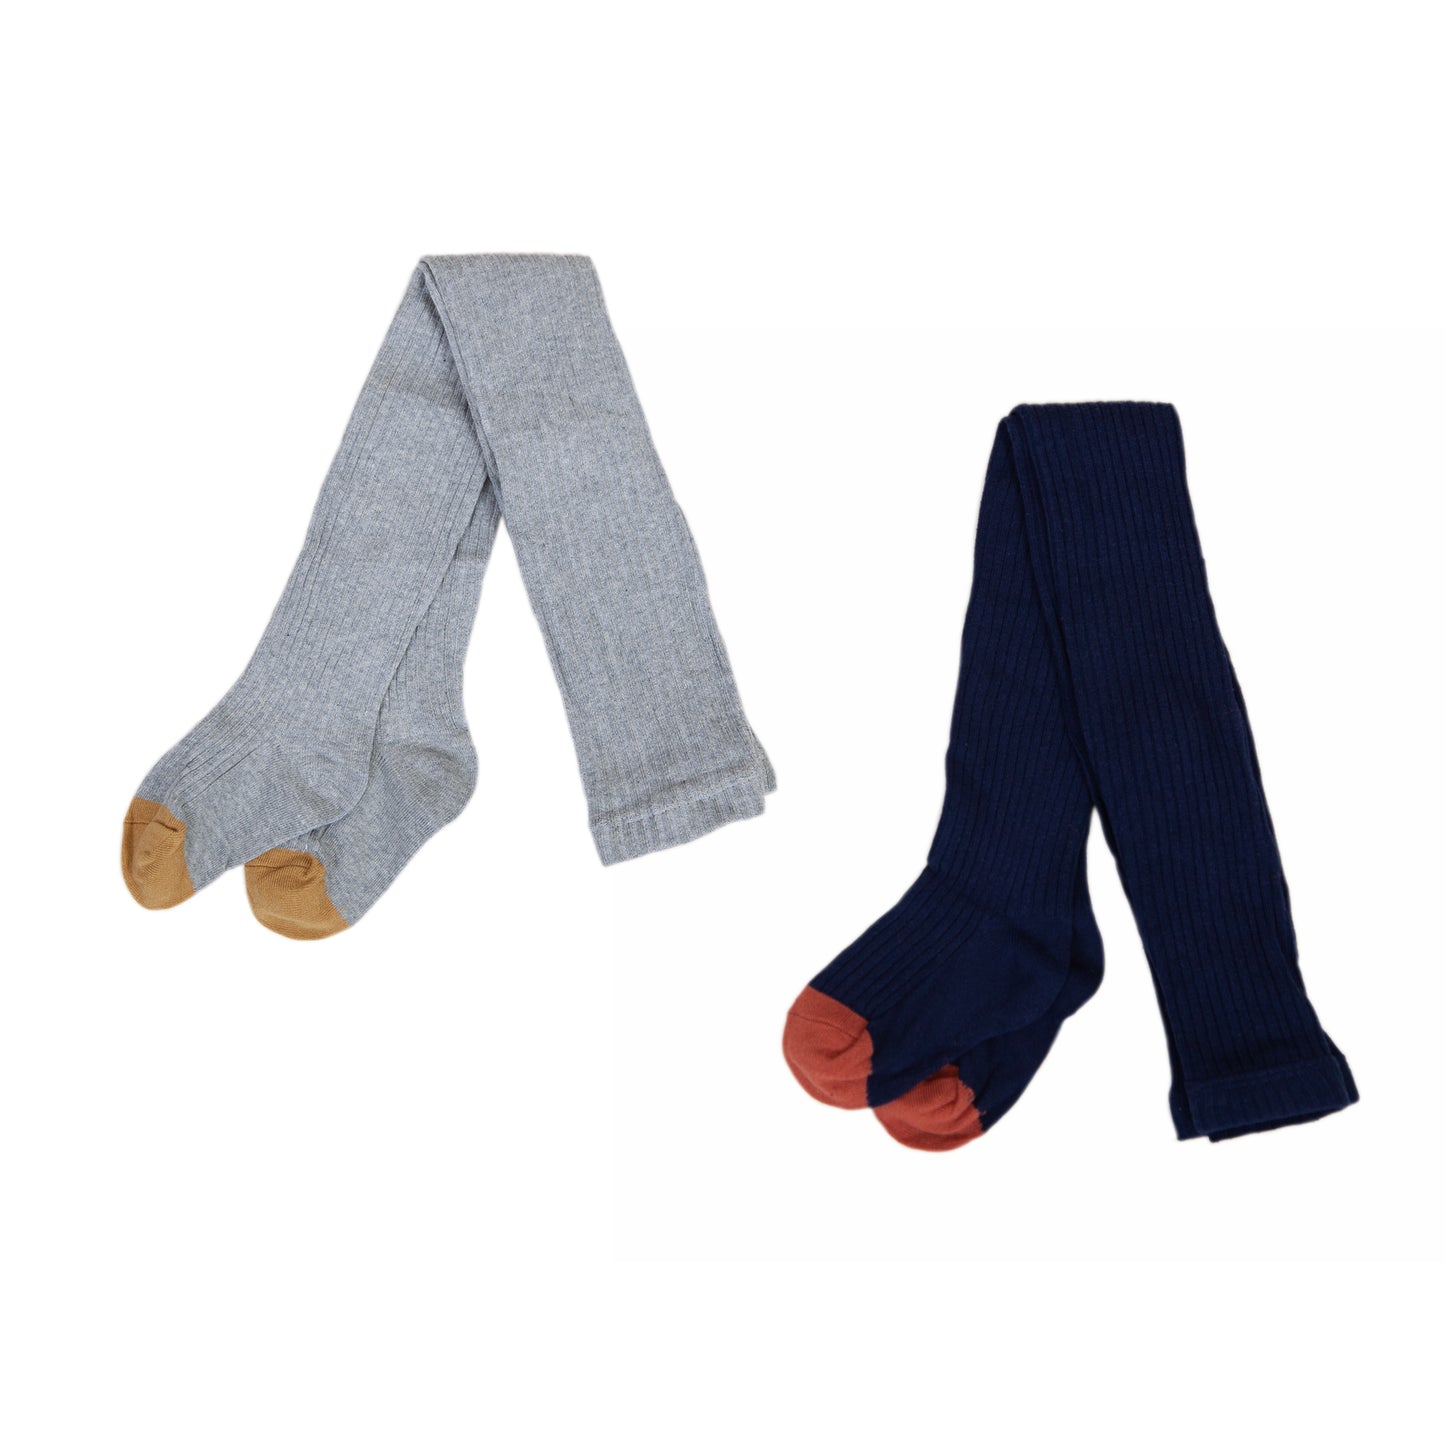 Jimmie tights two pack - navy/grey marle